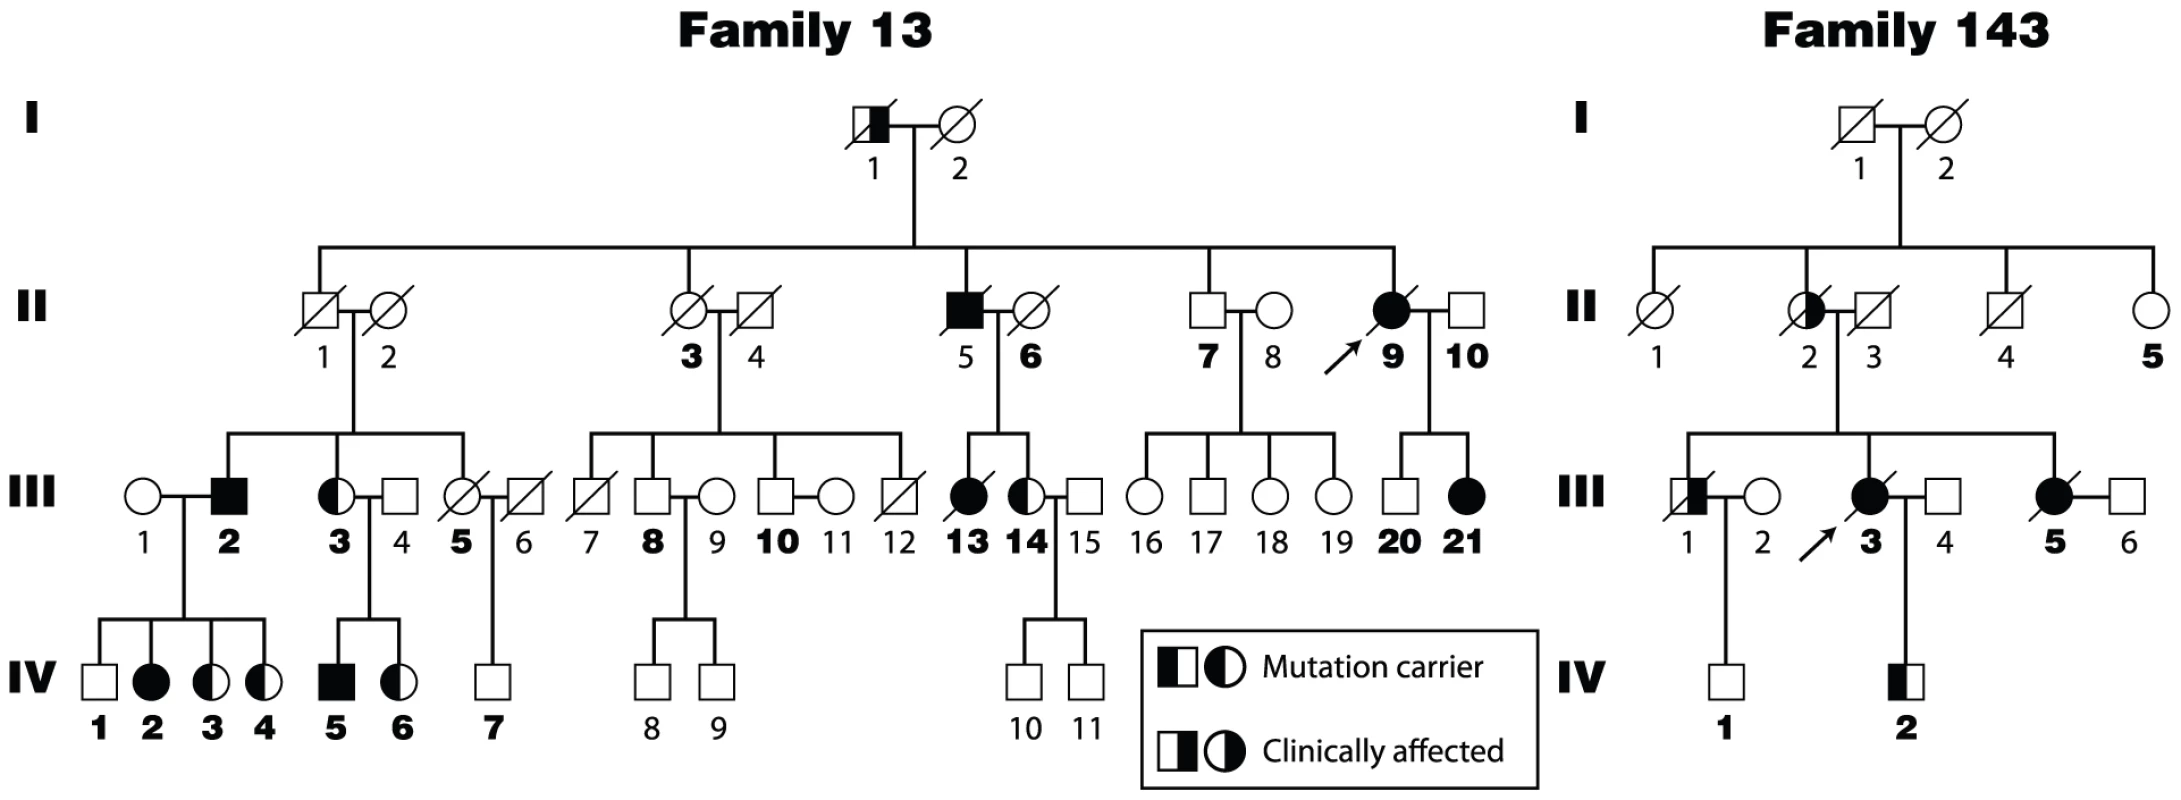 Four generation pedigrees of pulmonary fibrosis probands from Families 13 and 143 of the Vanderbilt Registry.